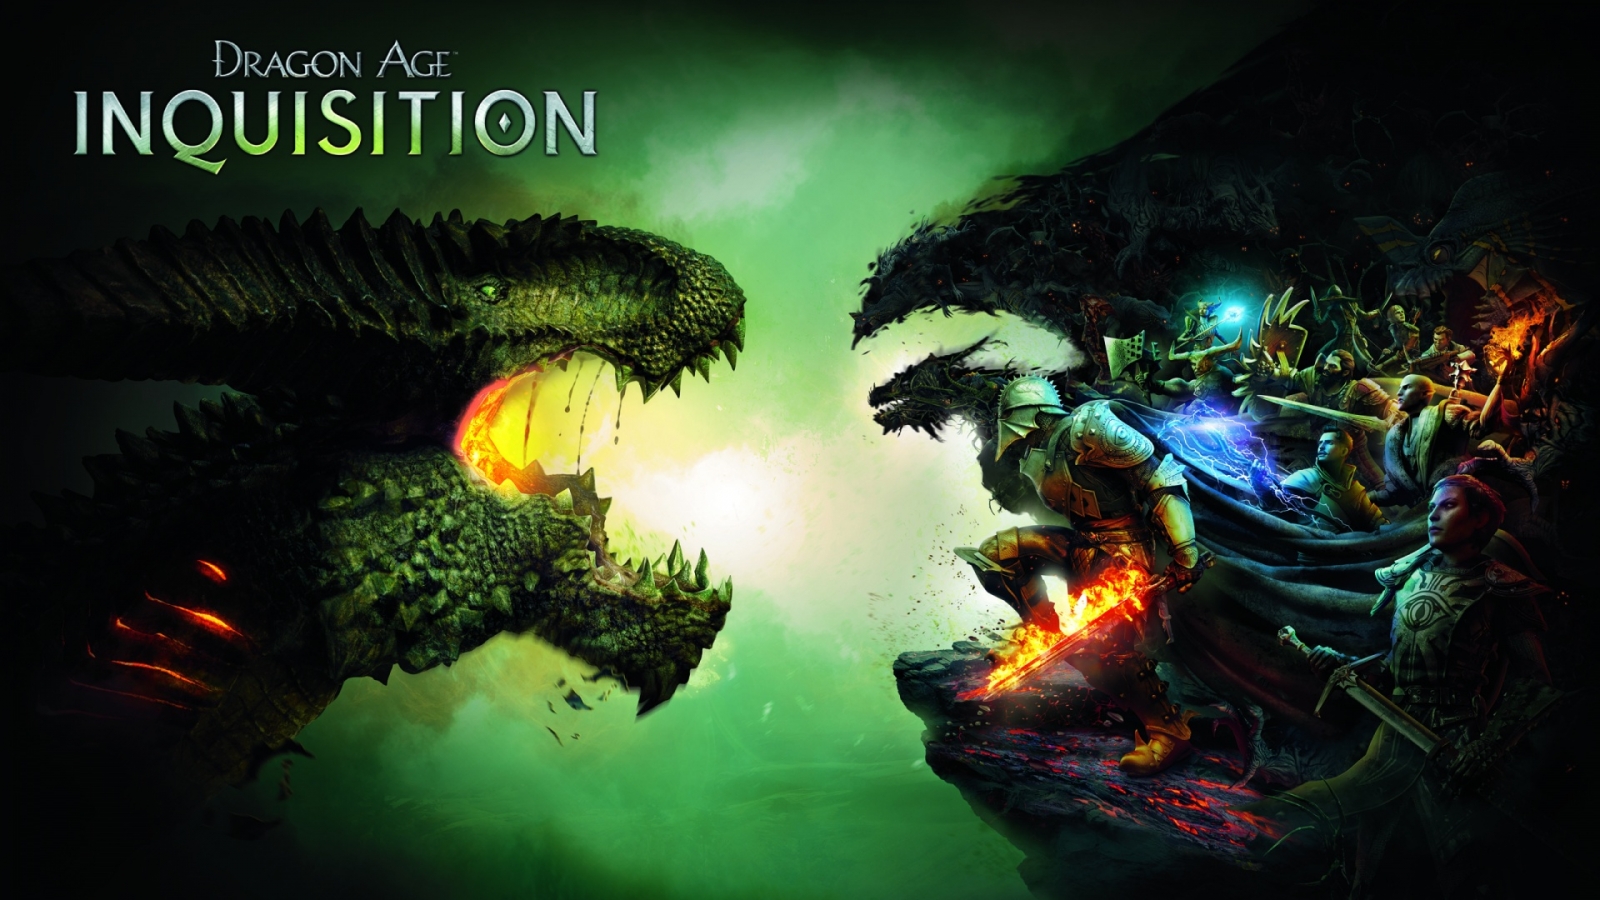 dragon_age_inquisition_game-1920x1080.jpg